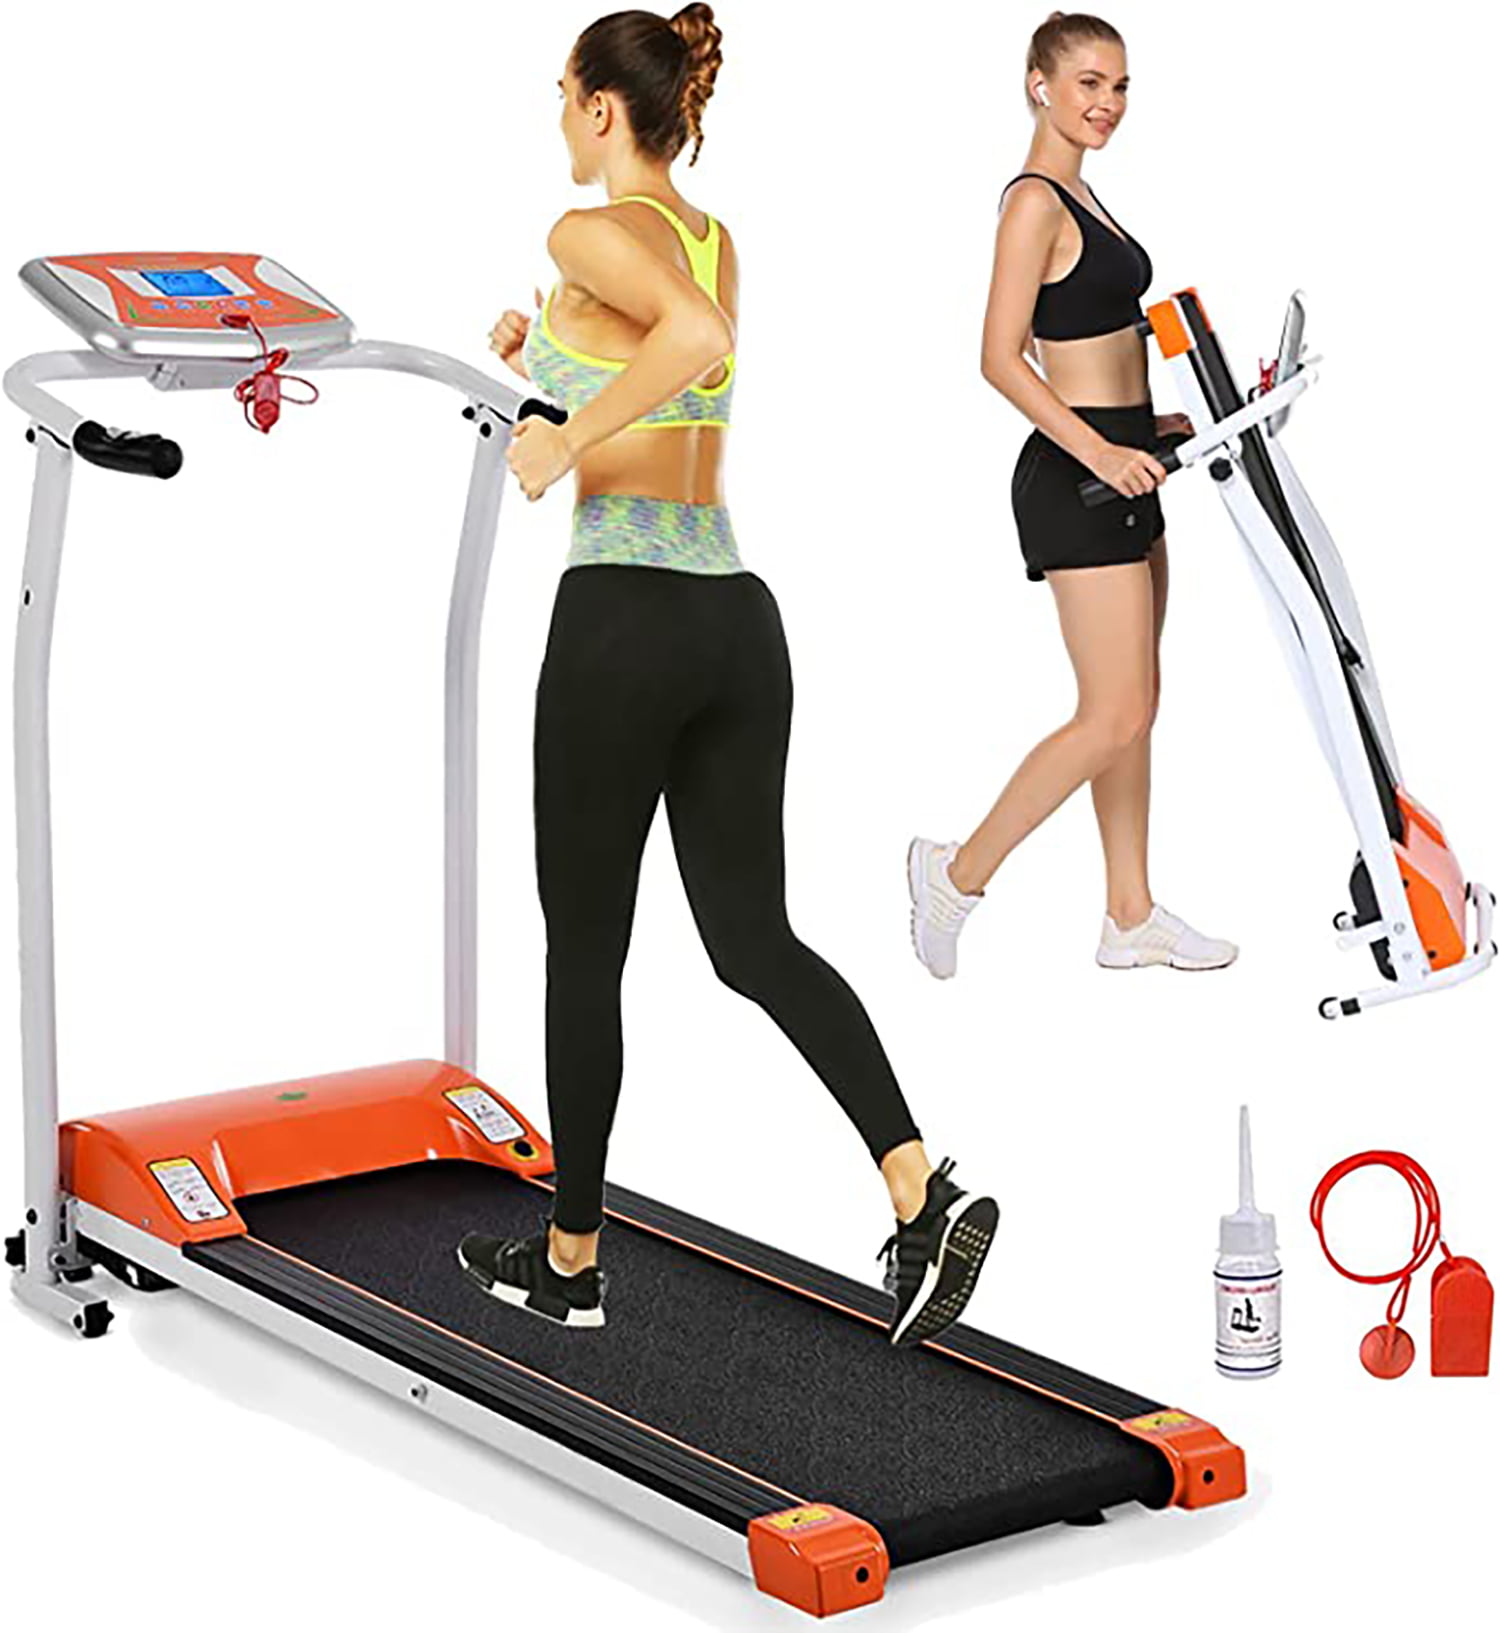 GYMAX Folding Treadmill Multimedia App Control & Bluetooth Speaker Free Installation Home Gym Treadmill for Small Apartment 2.25HP Fitness Running Machine with Large Screen Monitor 12 Preset Program 